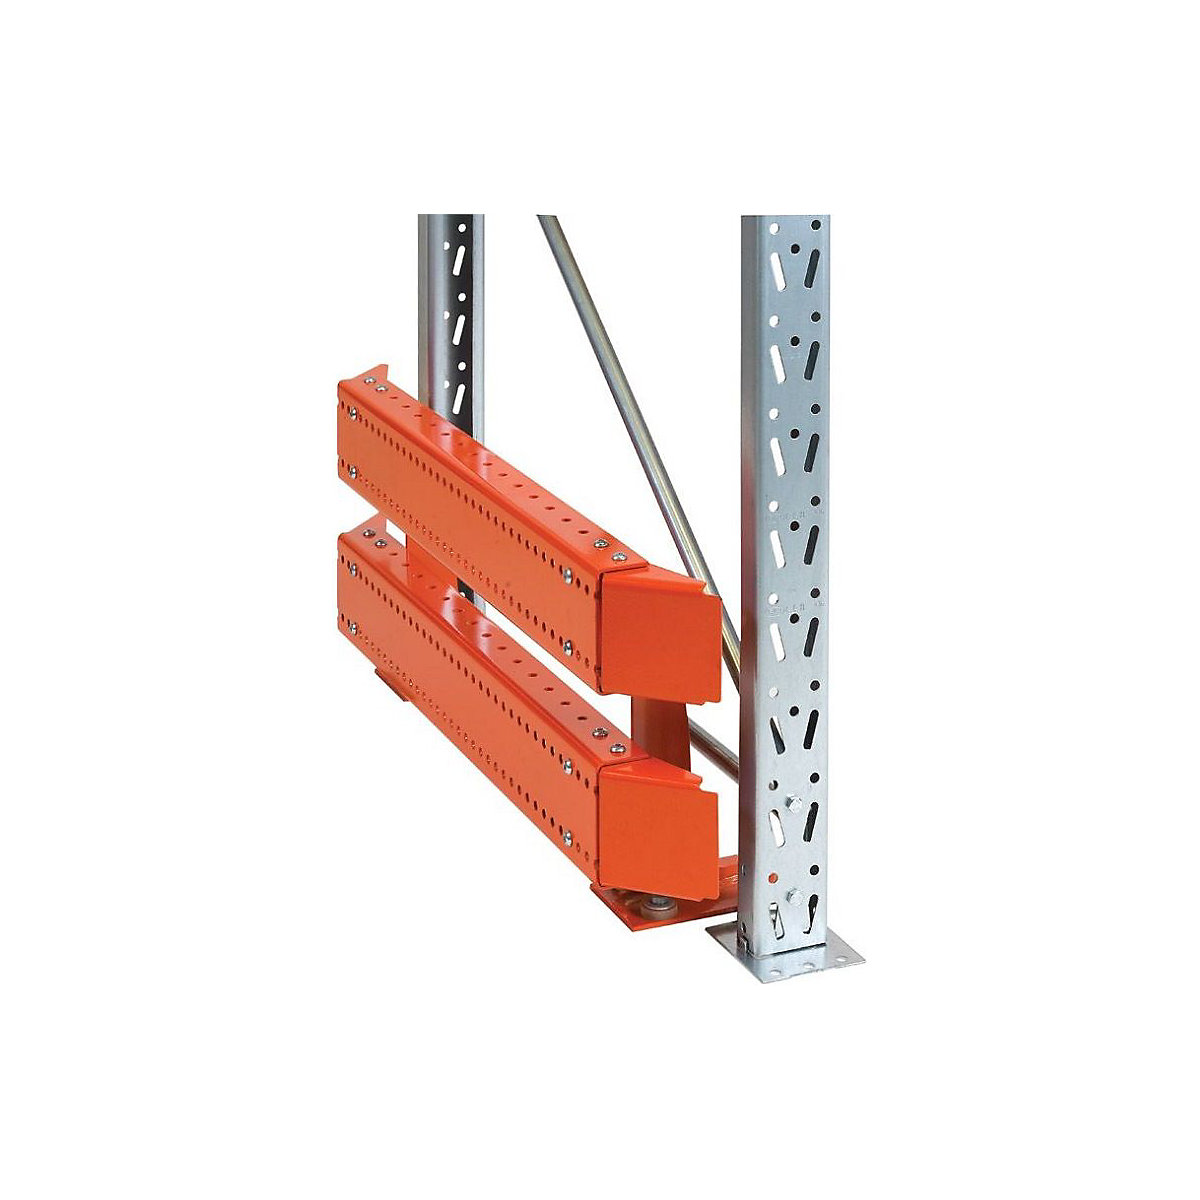 Collision protection for Space pallet racking